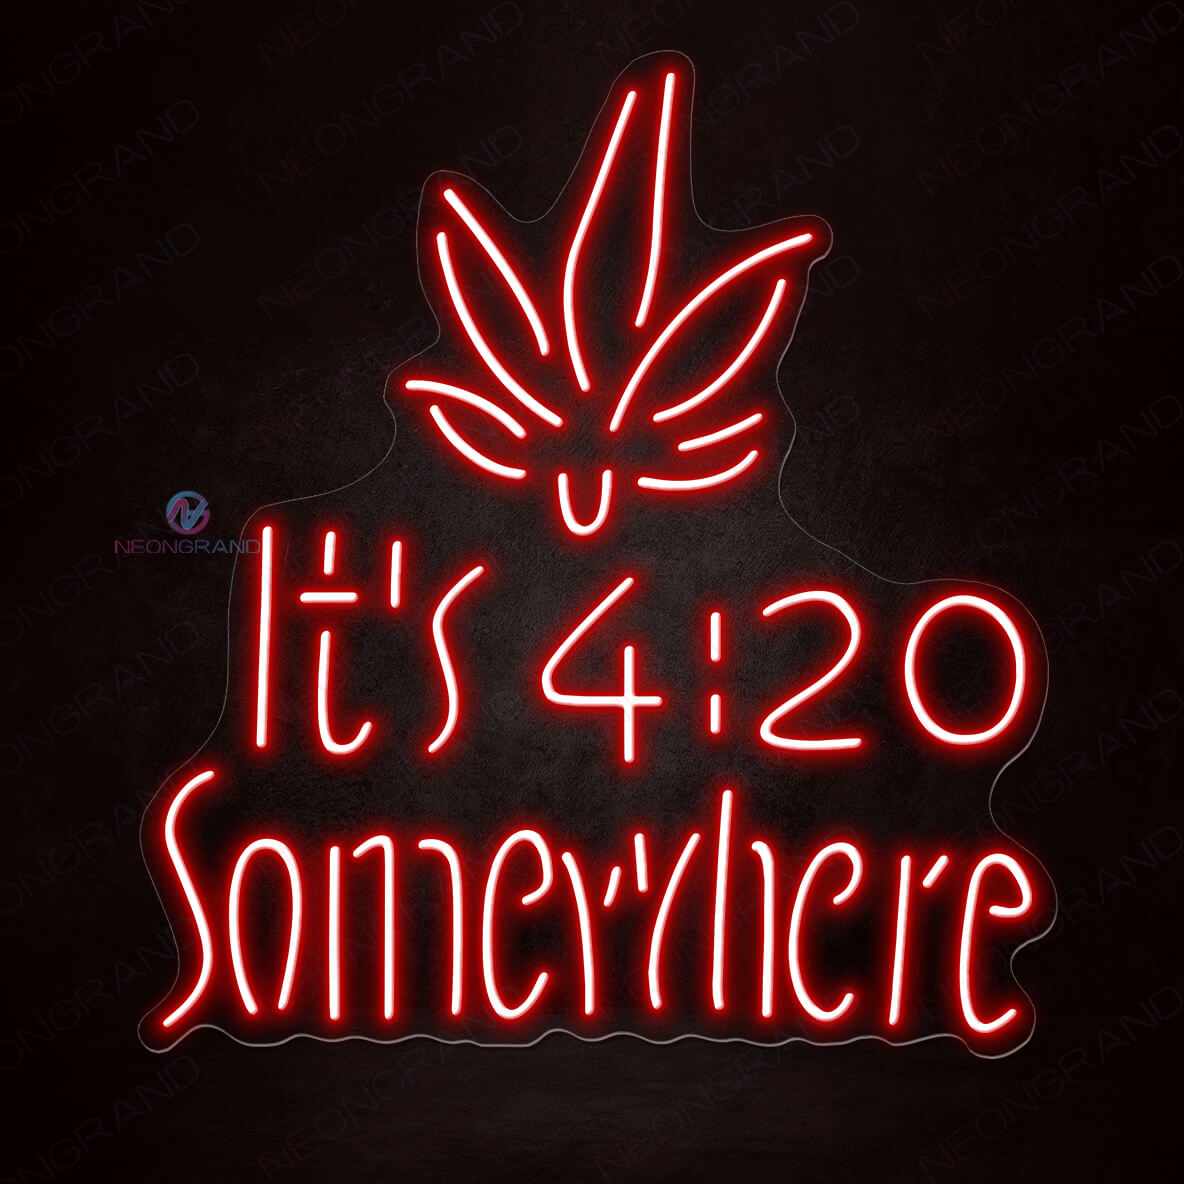 Its 420 Somewhere Neon Sign Weed Led Light red